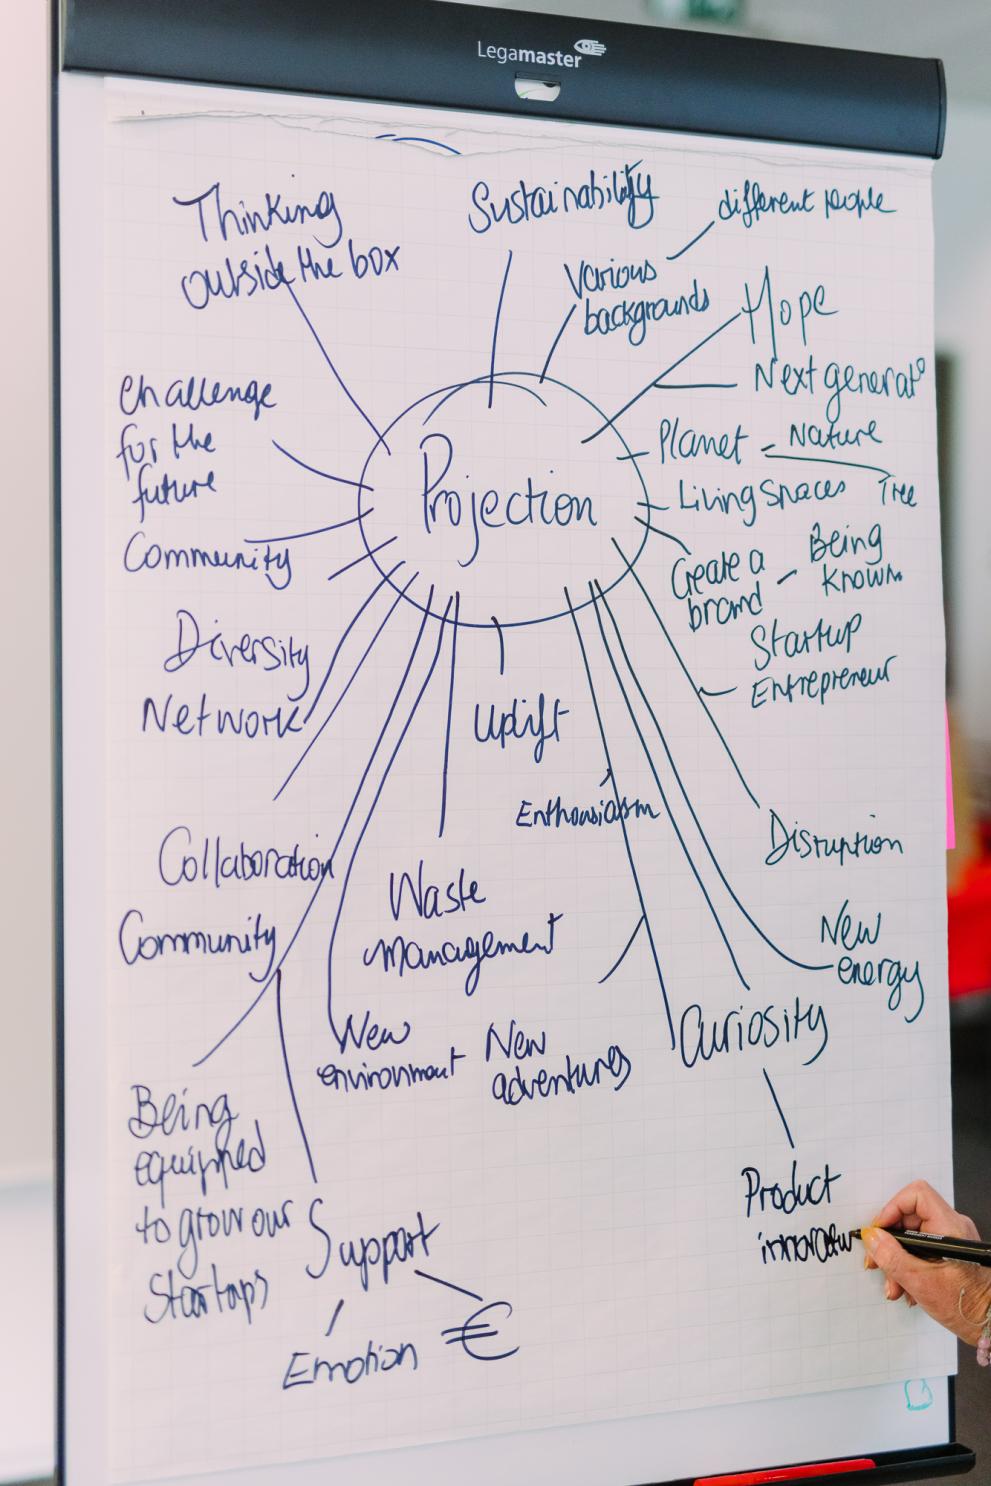 A flipchart showing a mind map for the word Projection linking to different areas such as "thinking outside the box", "challenge for the future" or "diversity network".